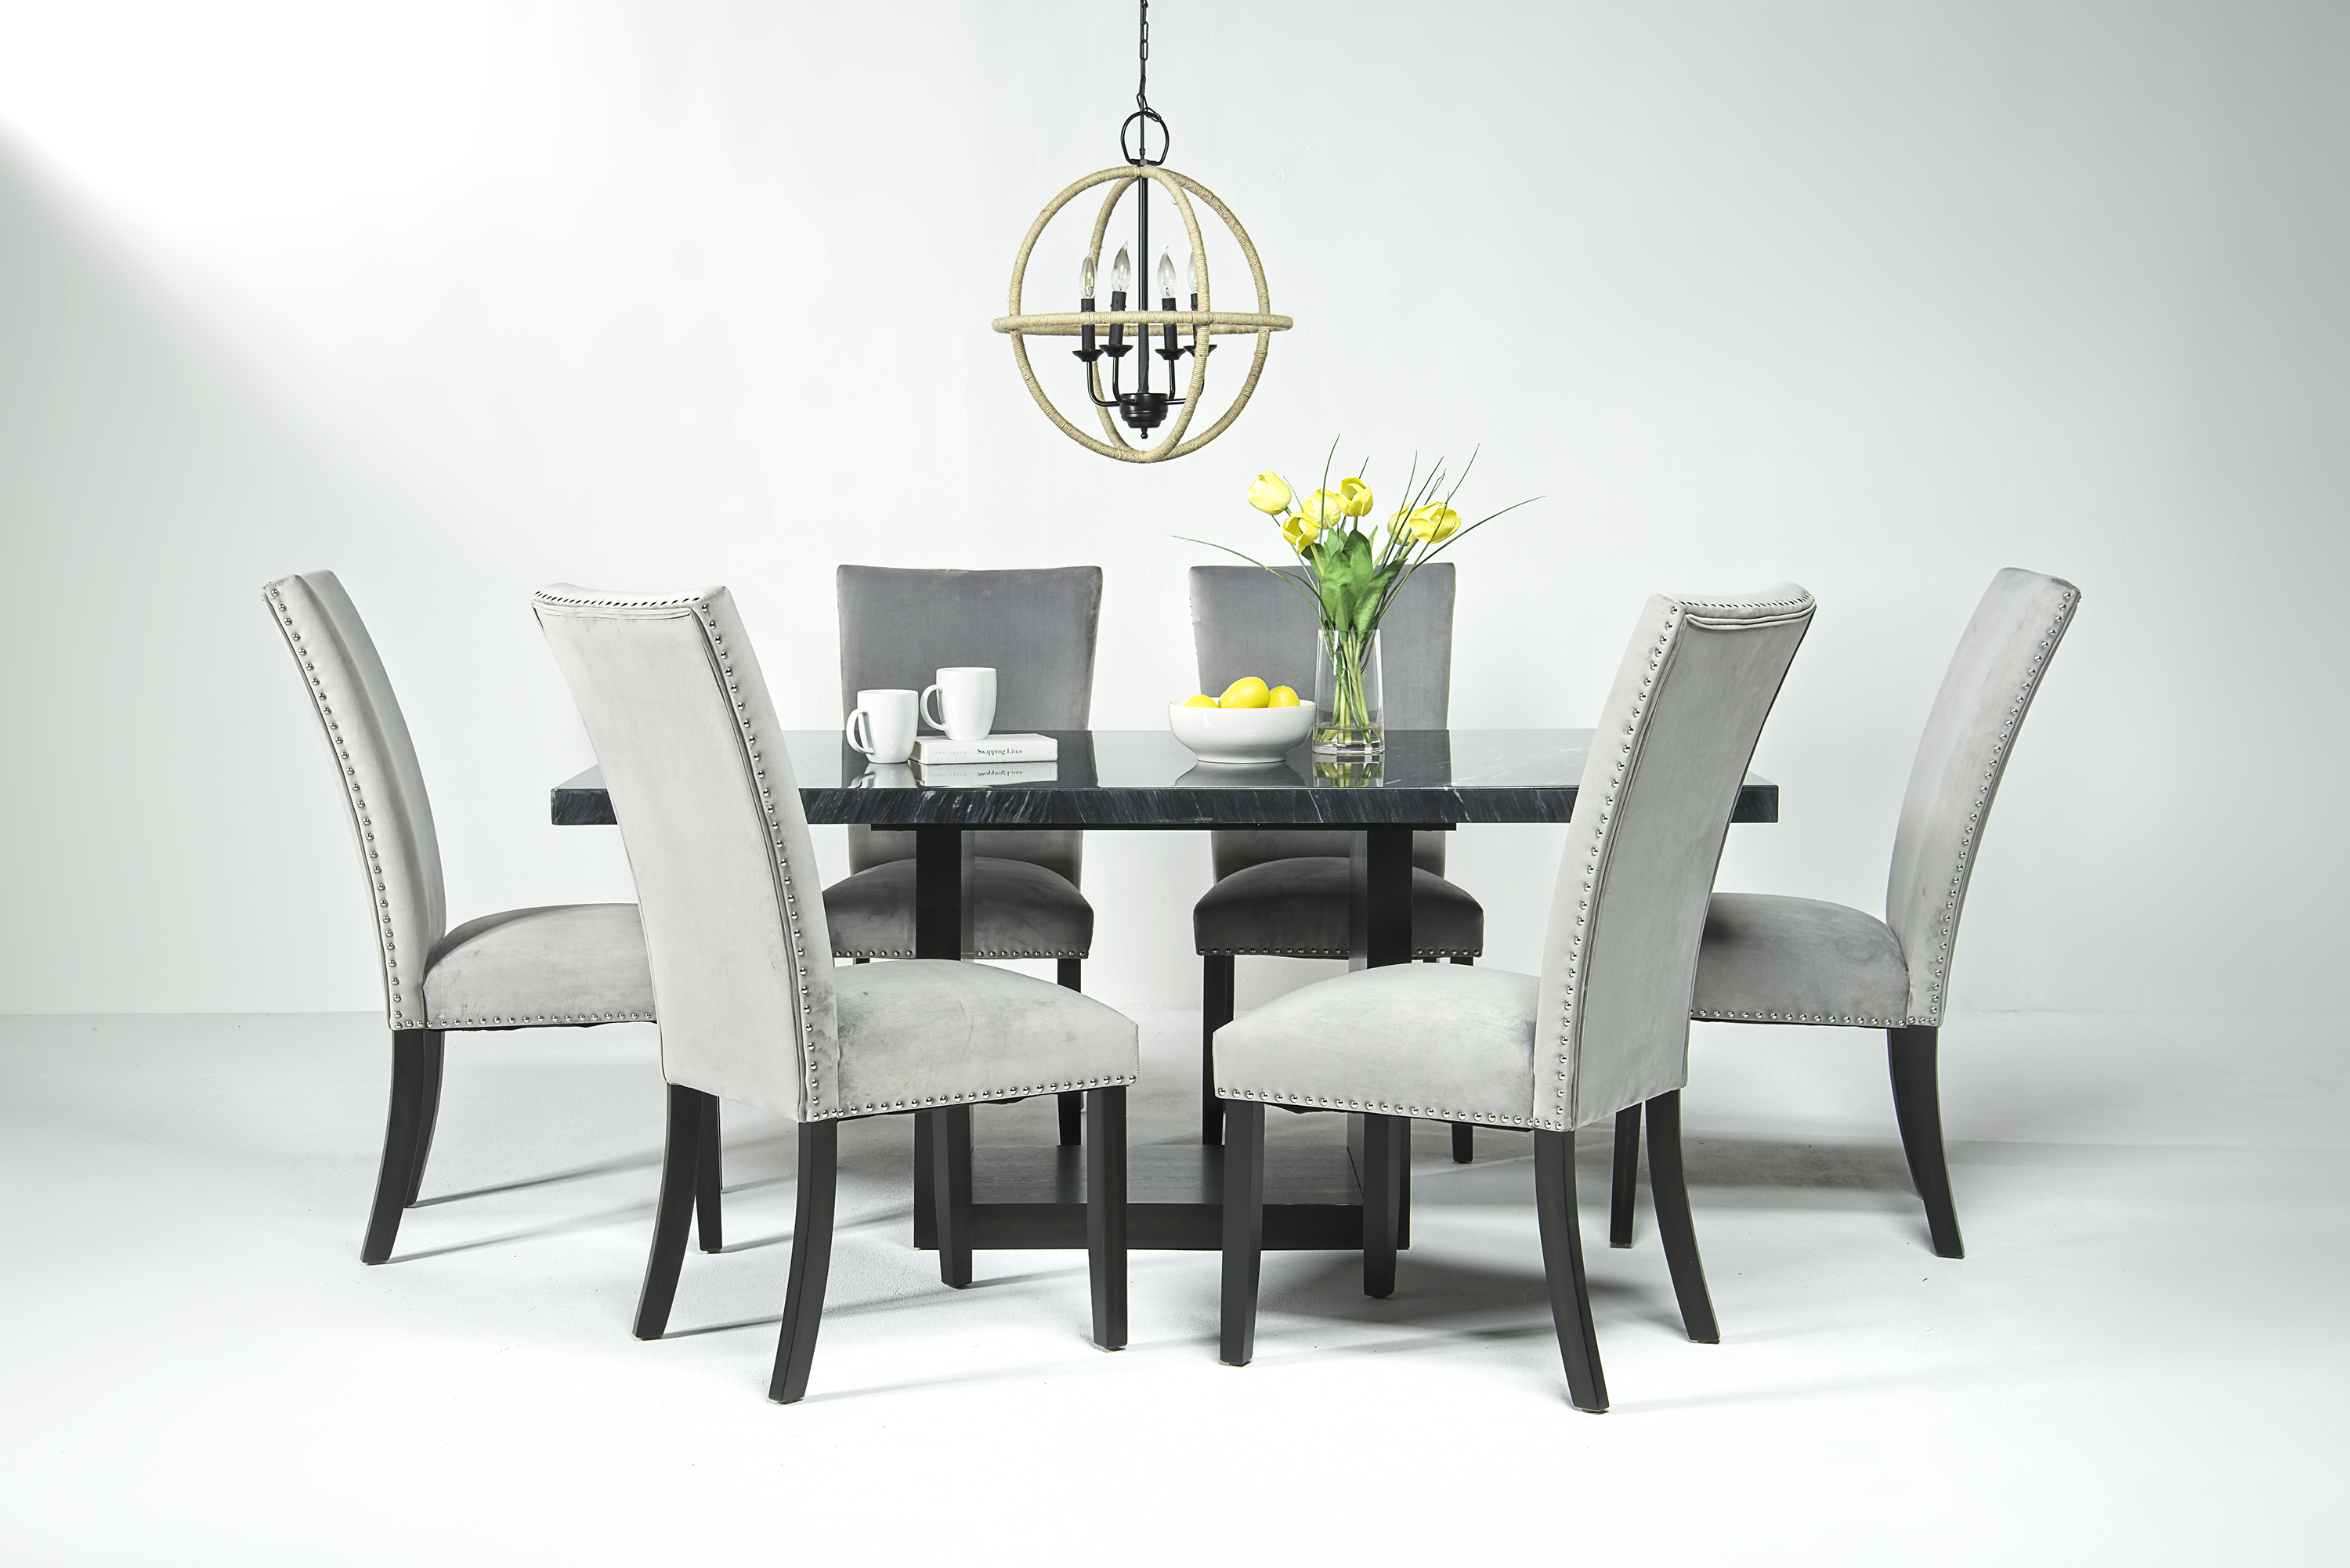 wake up Fade out fashion Francisco Dining Table & 6 Chairs in White/Gray | Mor Furniture